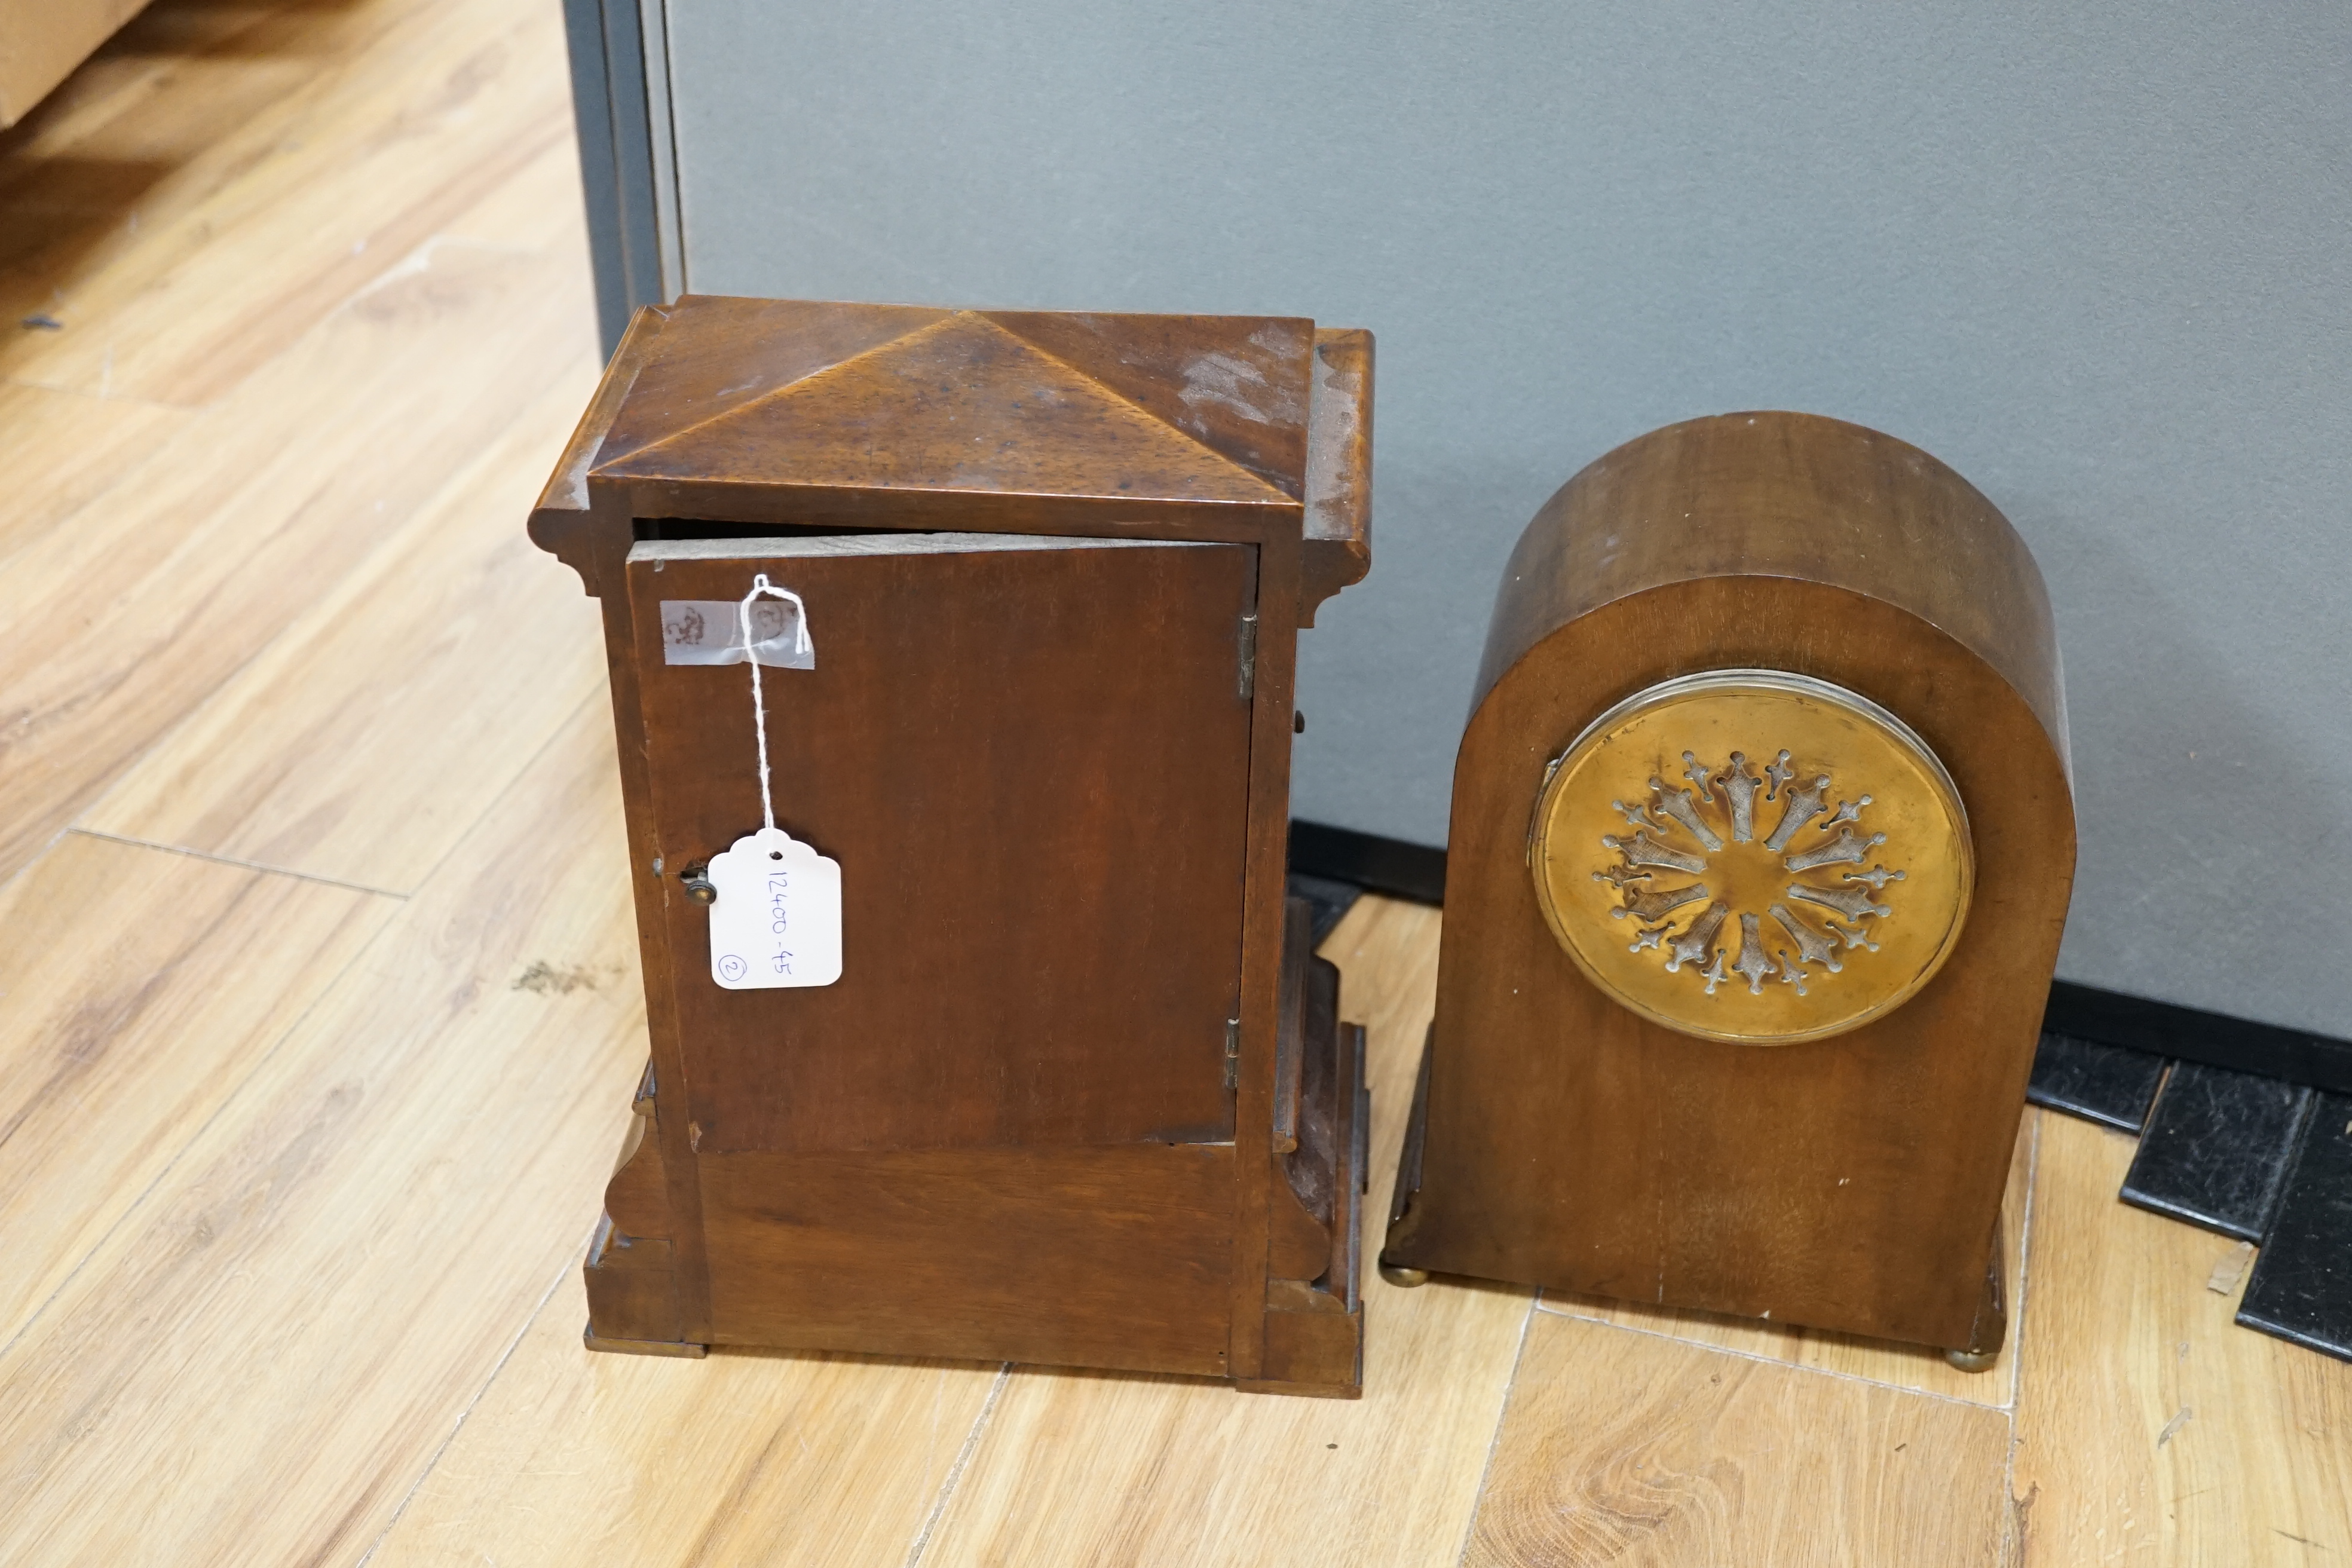 Two early 20th century mantel clocks; a mahogany timepiece and an inlaid Edwardian clock with engine turned face, striking on a coiled gong, tallest 35cm